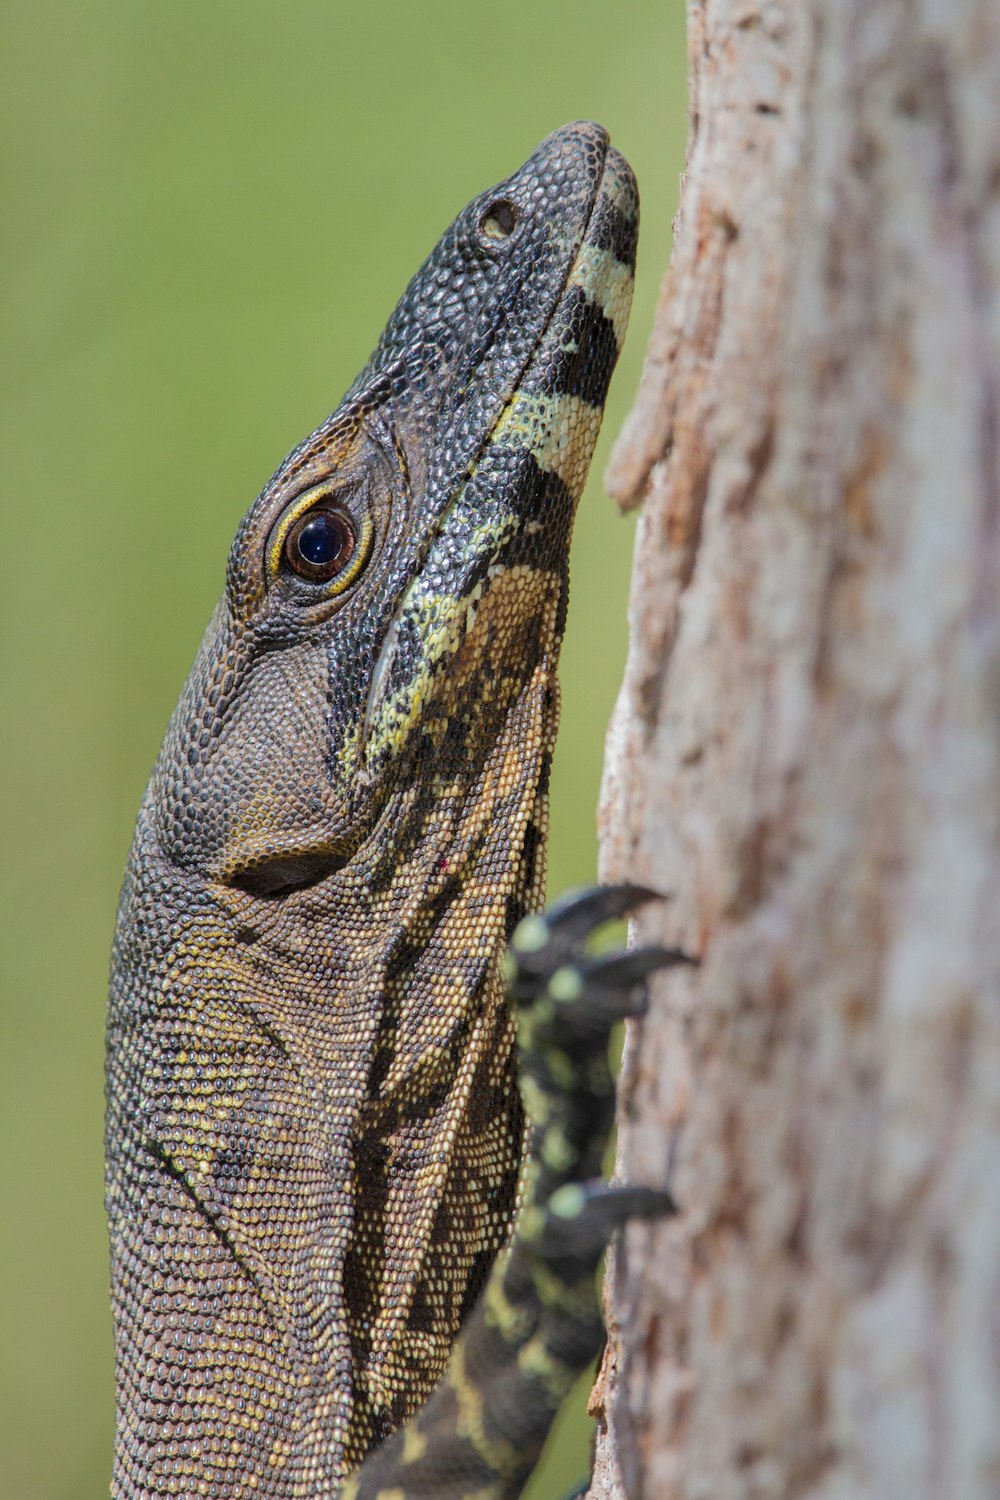 green and black lizard on brown tree trunk